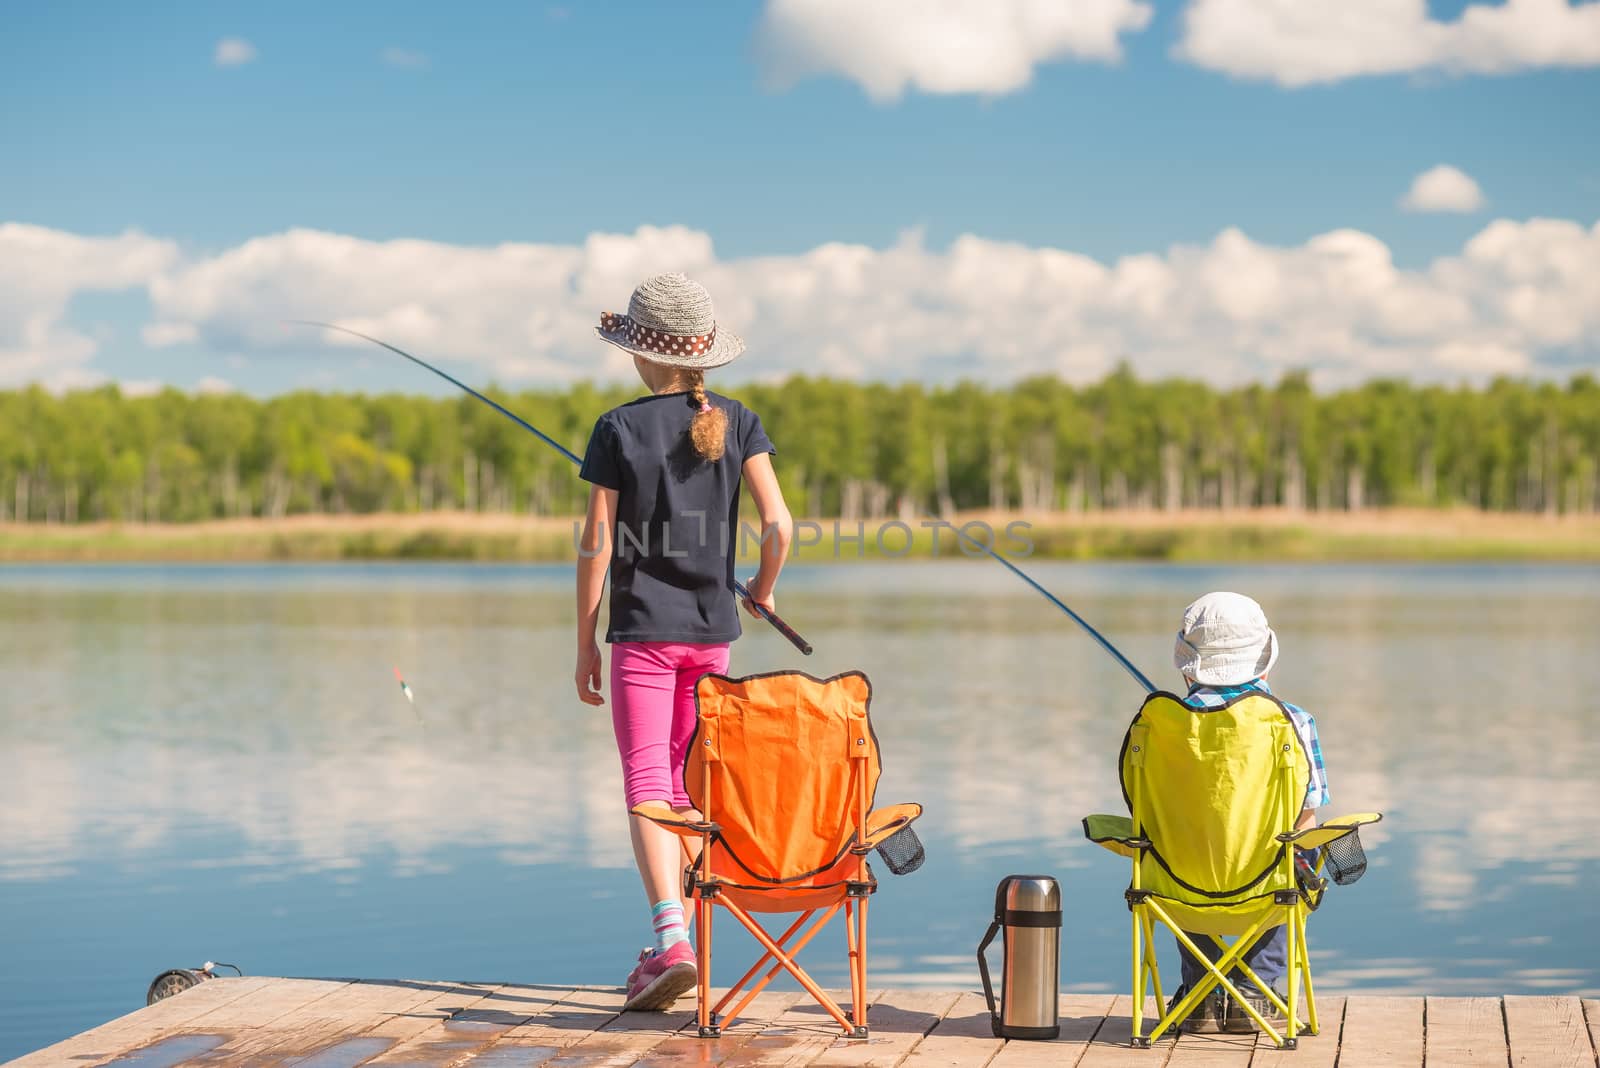 a girl and a boy spend time on the pier, children with fishing rods are fishing